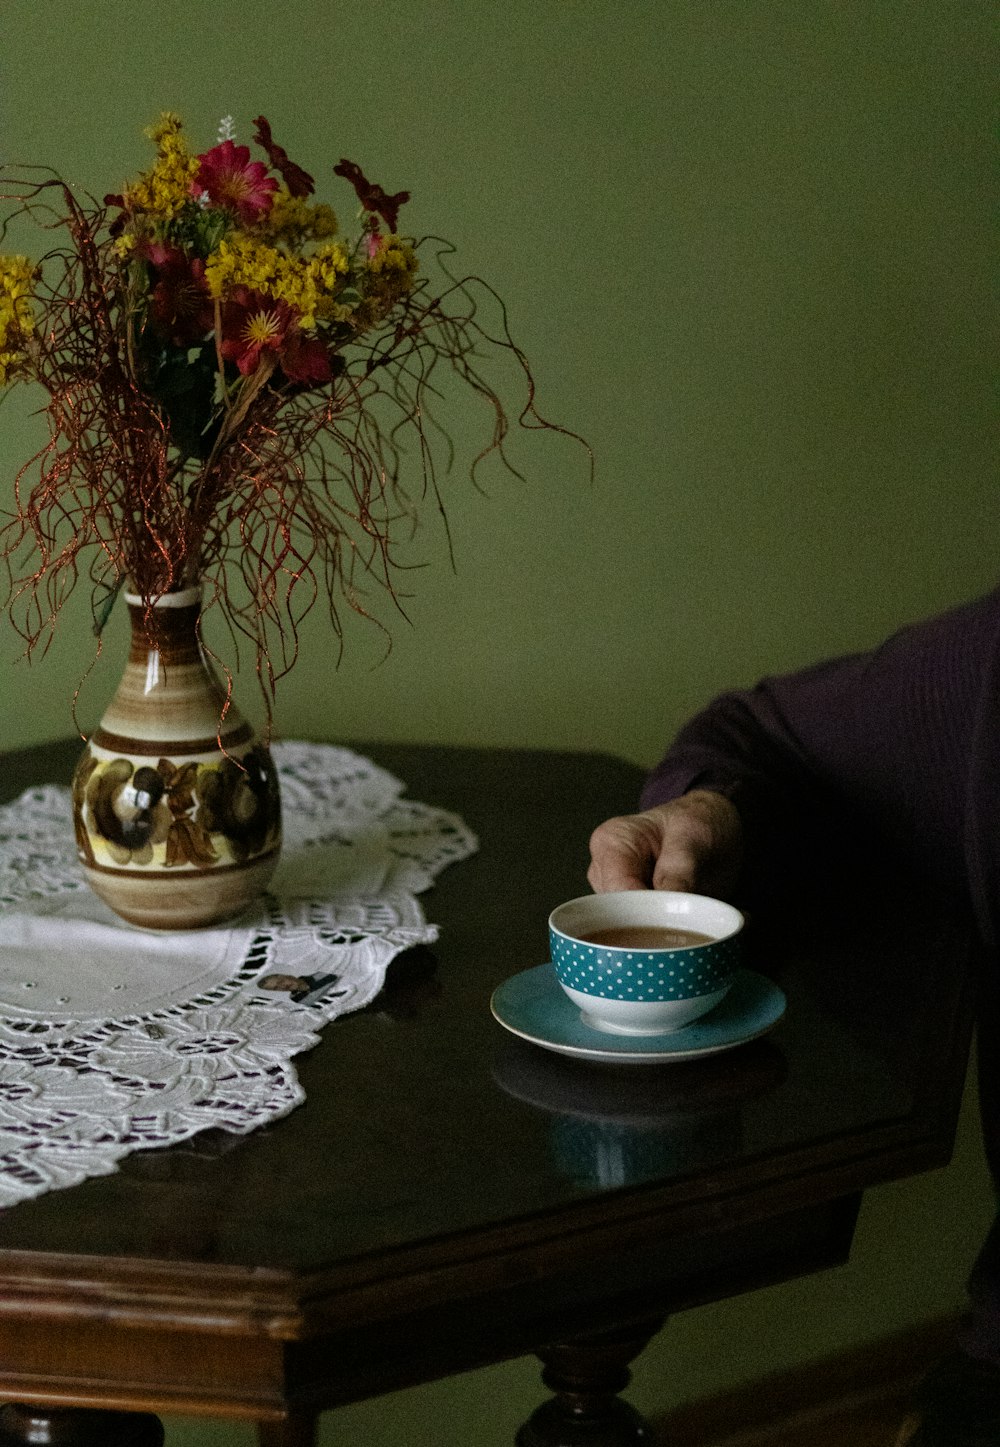 a person sitting at a table with a cup and saucer